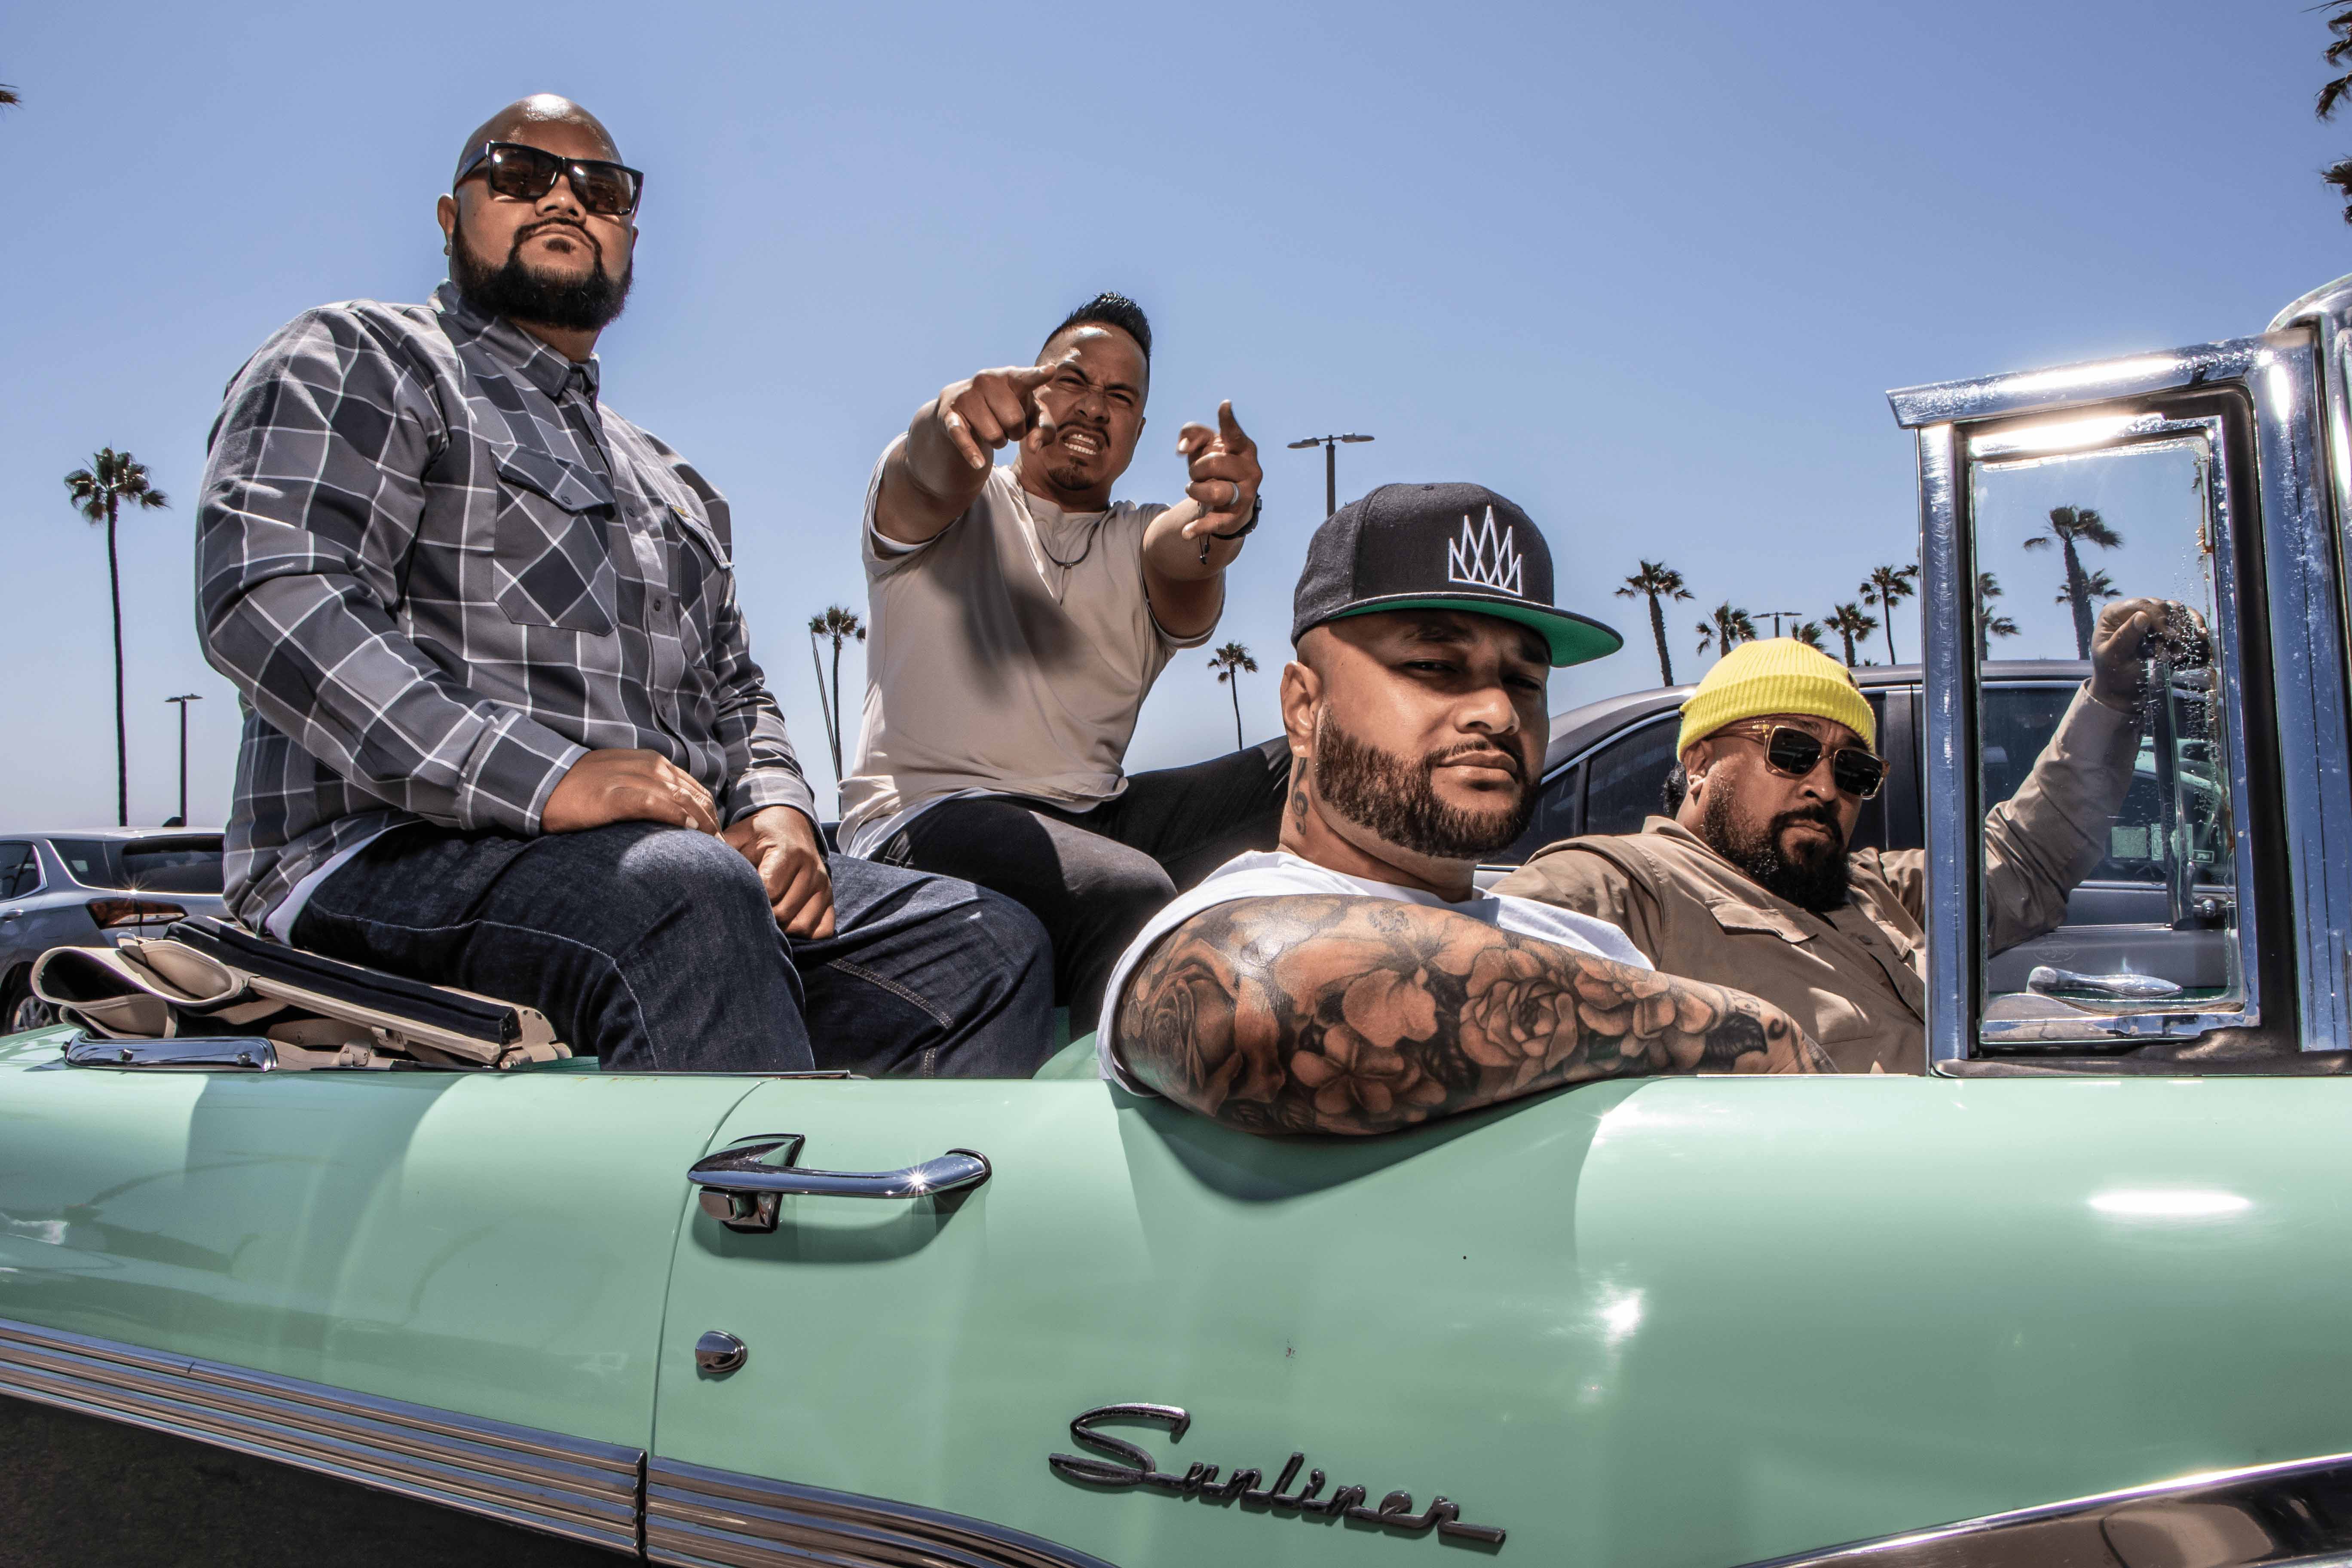 Common Kings in Anaheim promo photo for Ticketmaster presale offer code